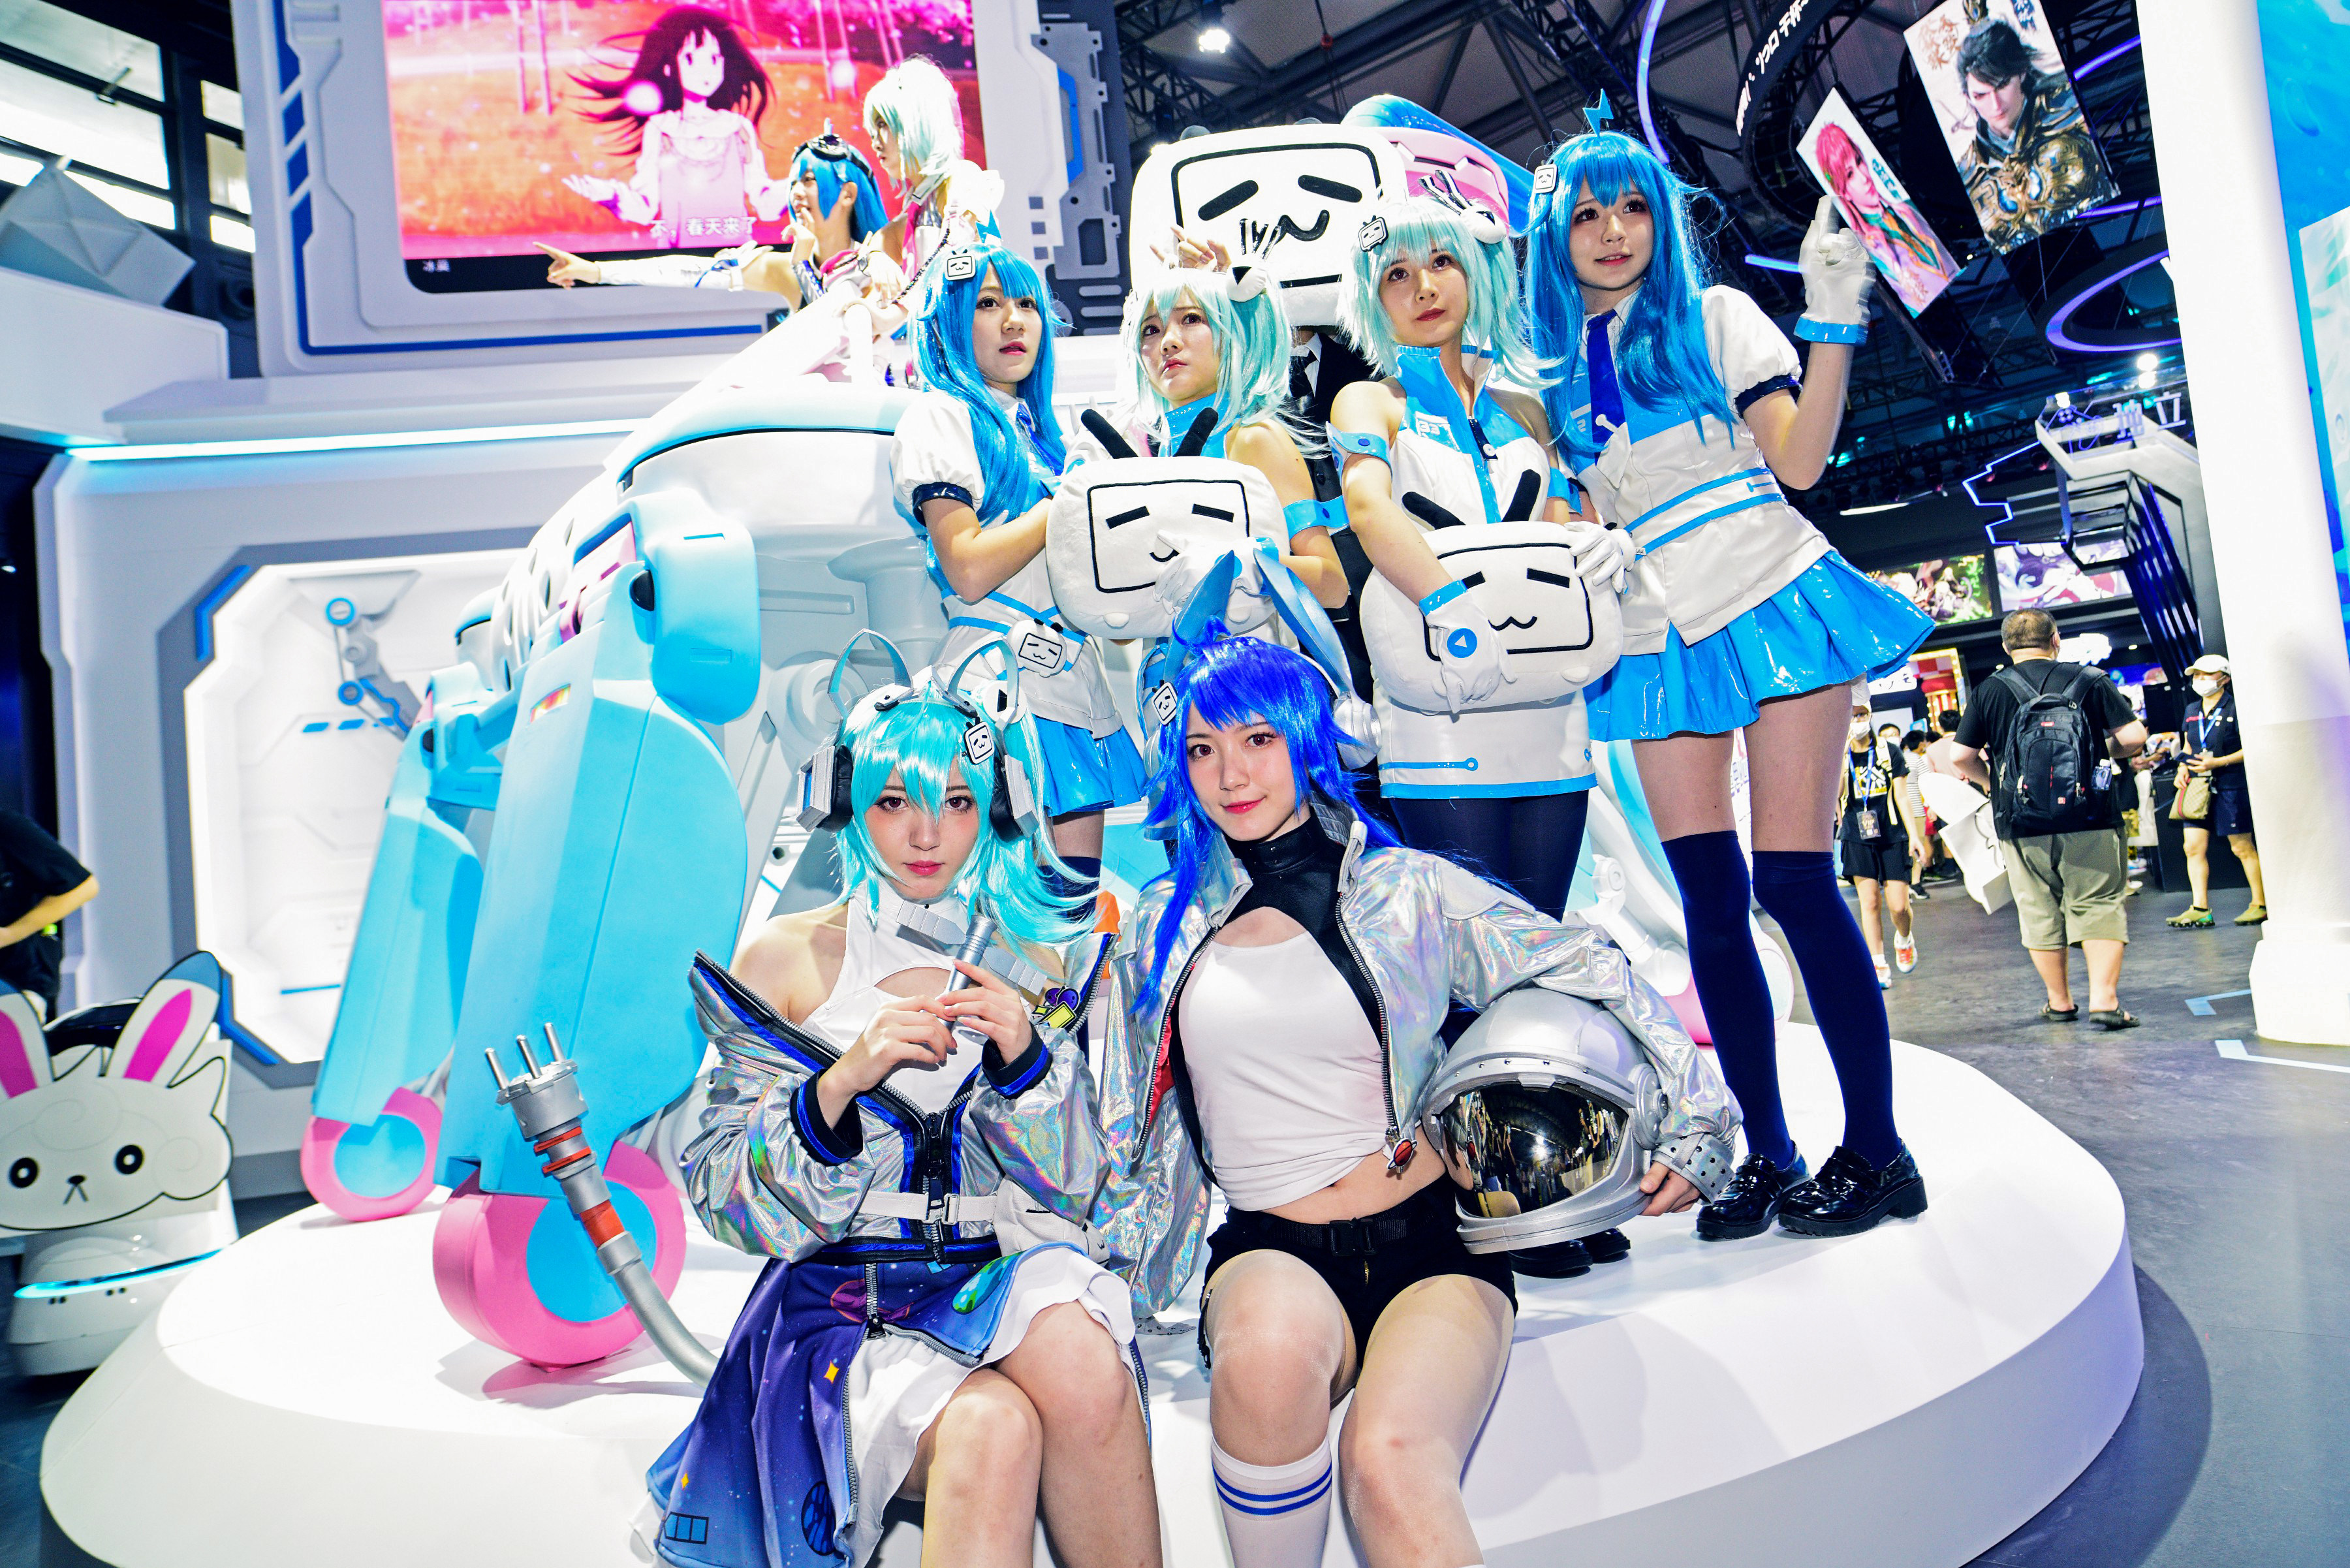 Cosplayers perform at the video platform Bilibili stand during the 2020 China Digital Entertainment Expo & Conference (ChinaJoy) at Shanghai New International Expo Center on July 31. The company is pinning its hopes on consumers’ love affair with videos continuing. Photo: Getty Images